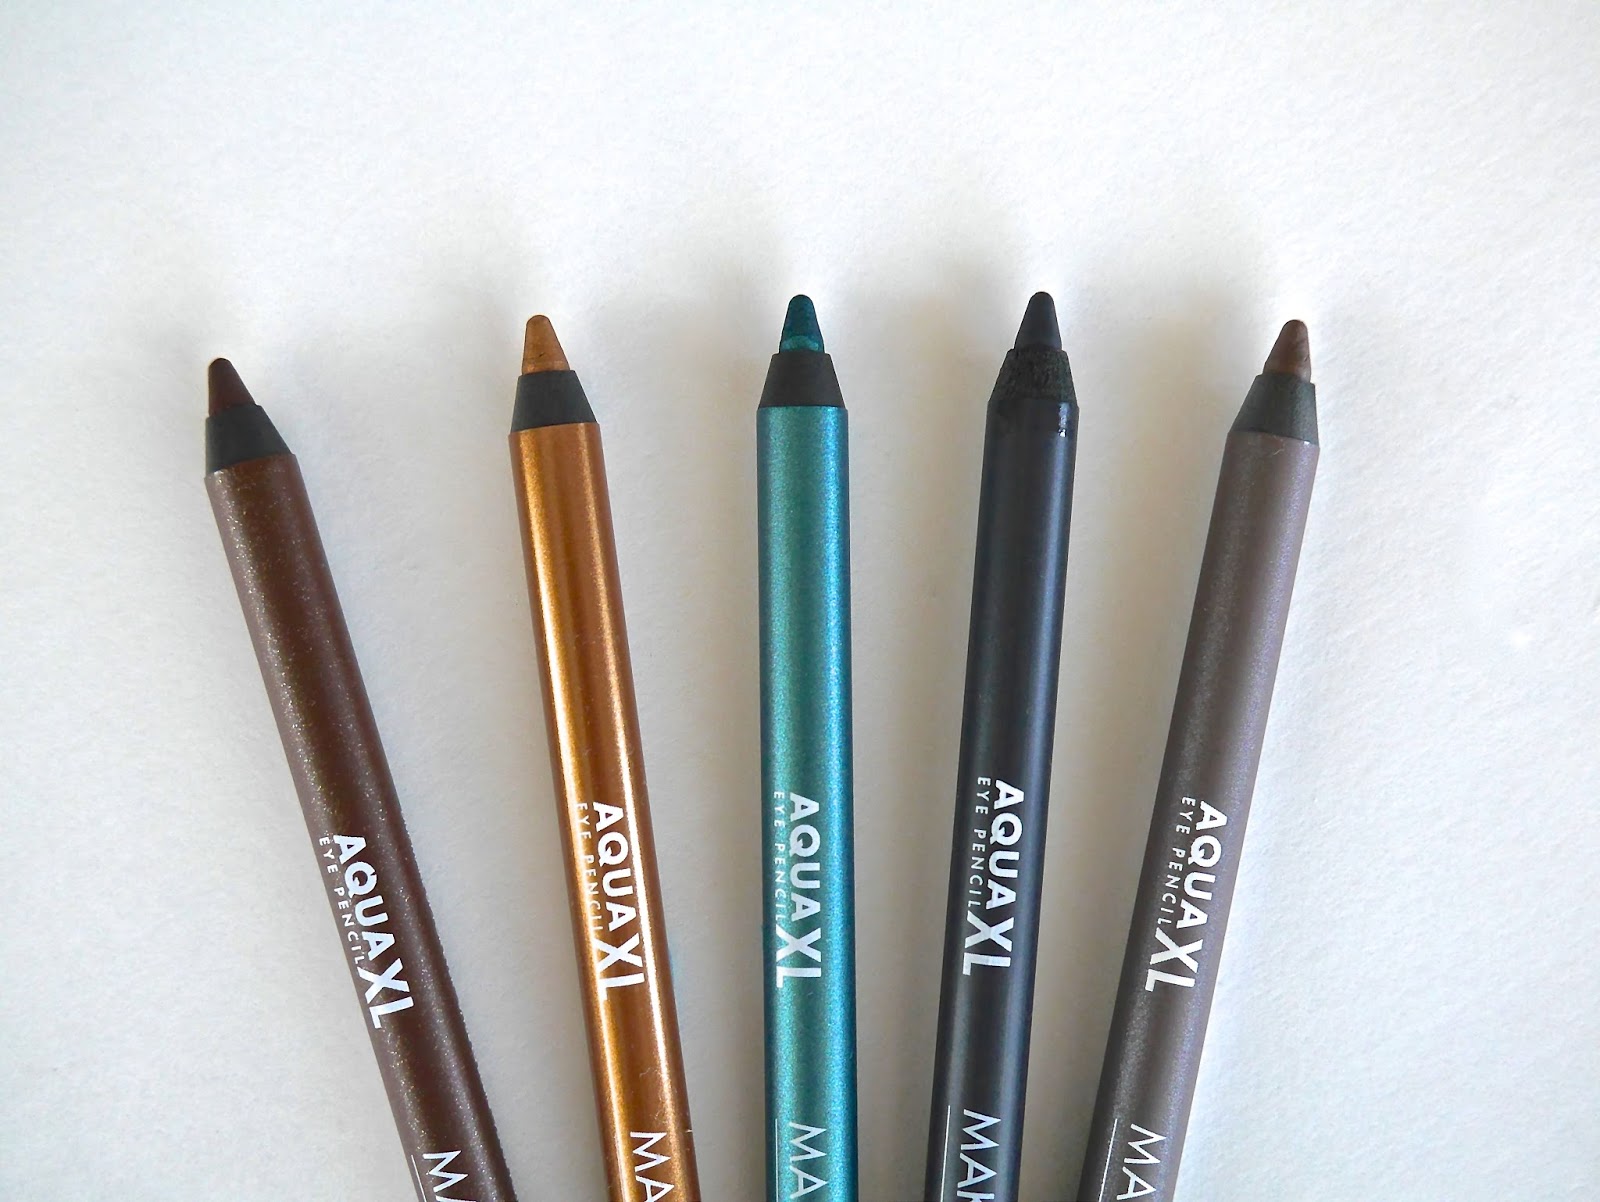 REVIEW: Make Up For Ever Aqua XL Eye Pencil Waterproof Eyeliner / Reflection Sanity